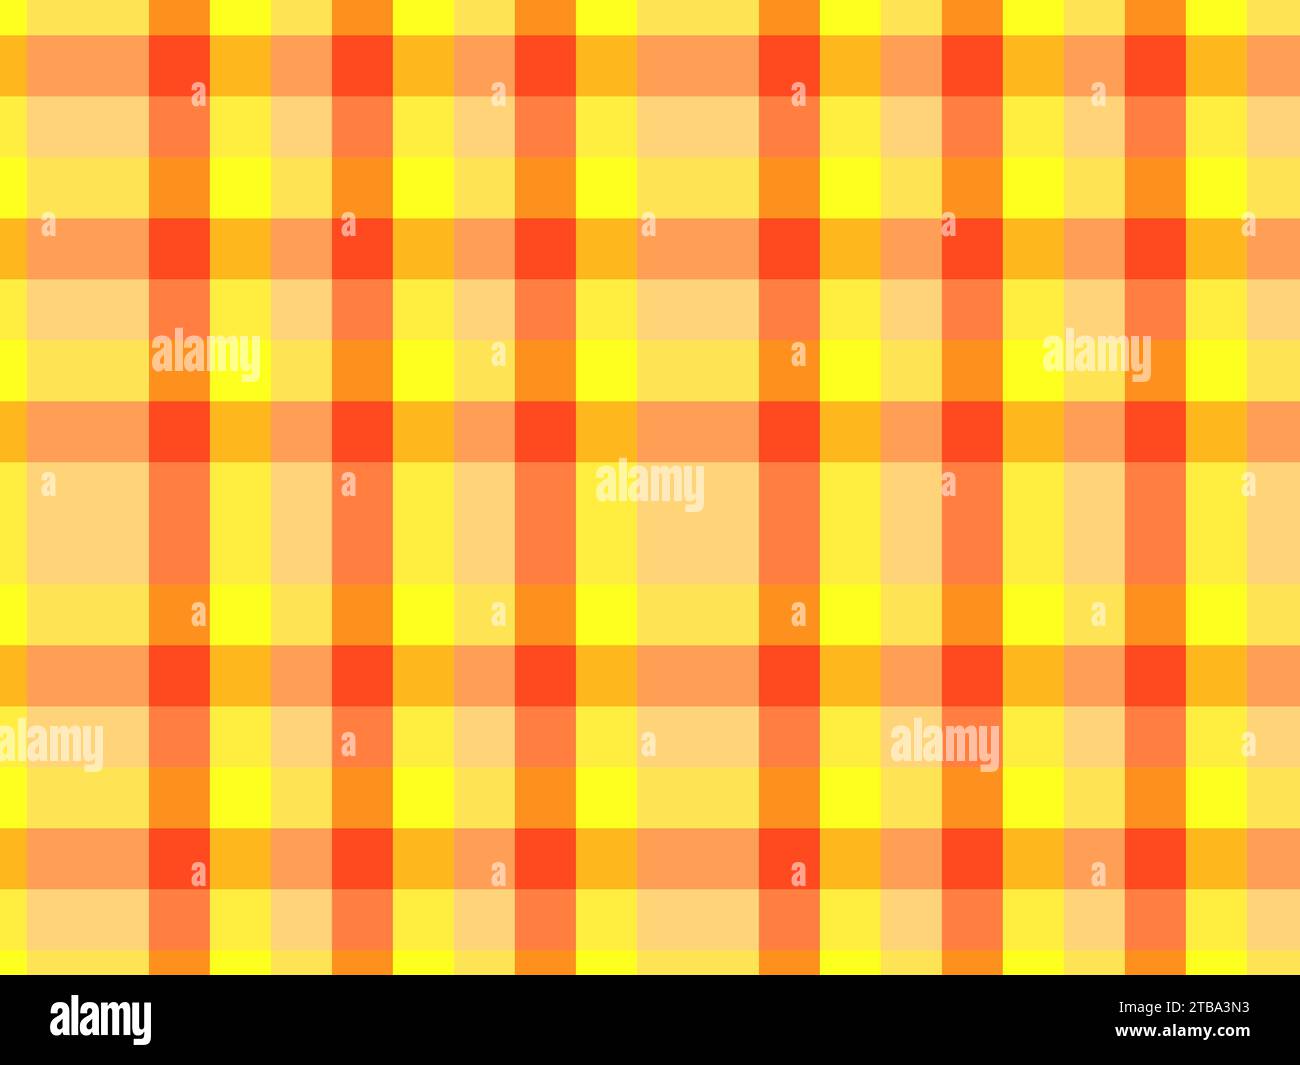 Christmas Plaid Vector Patterns, Shirt Fabric Textures Xmas Backgrounds, Pattern Tile Swatches Included Stock Vector